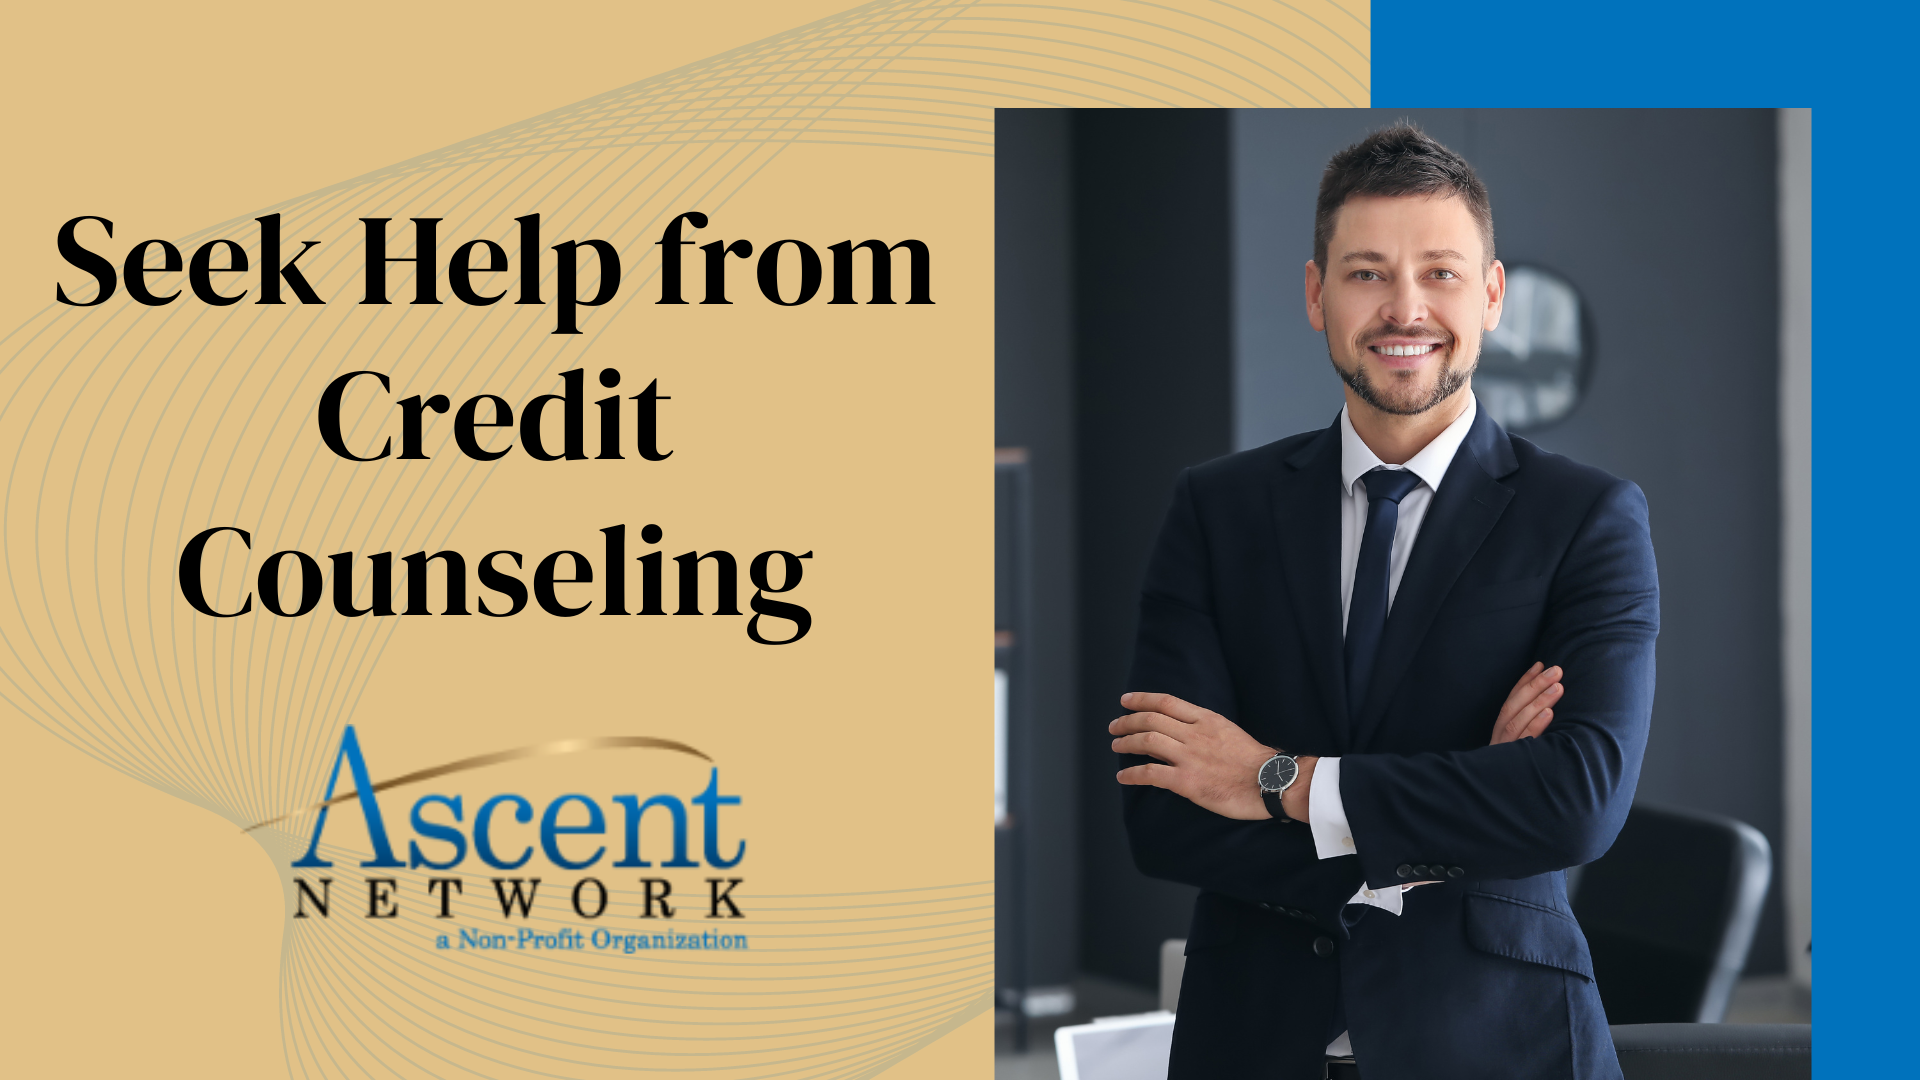 Seek Help from Credit Counseling